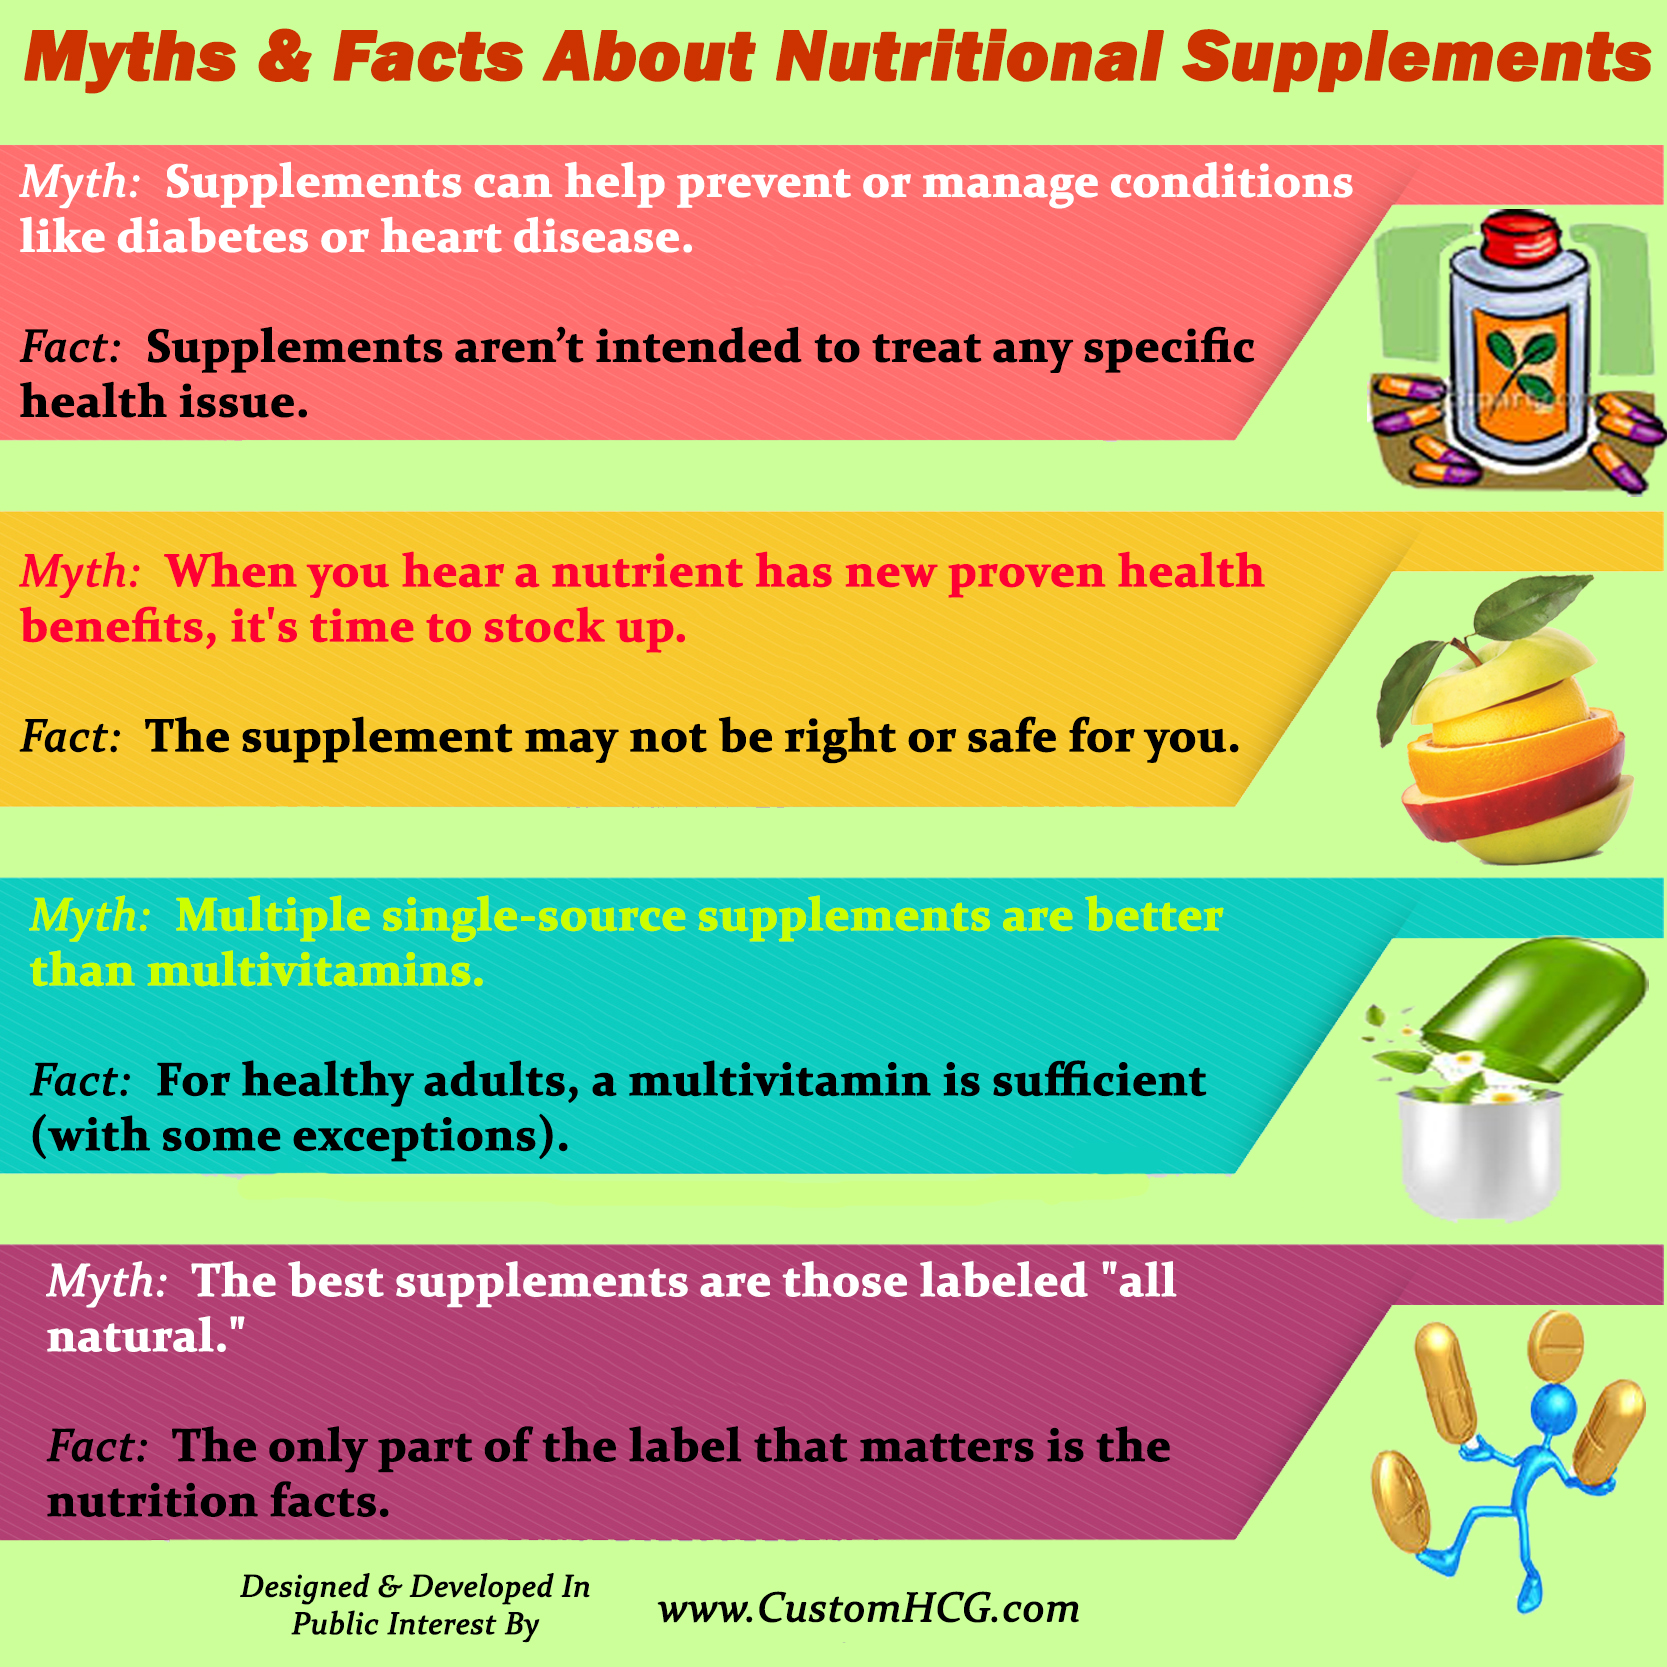 The reality behind nutrition myths